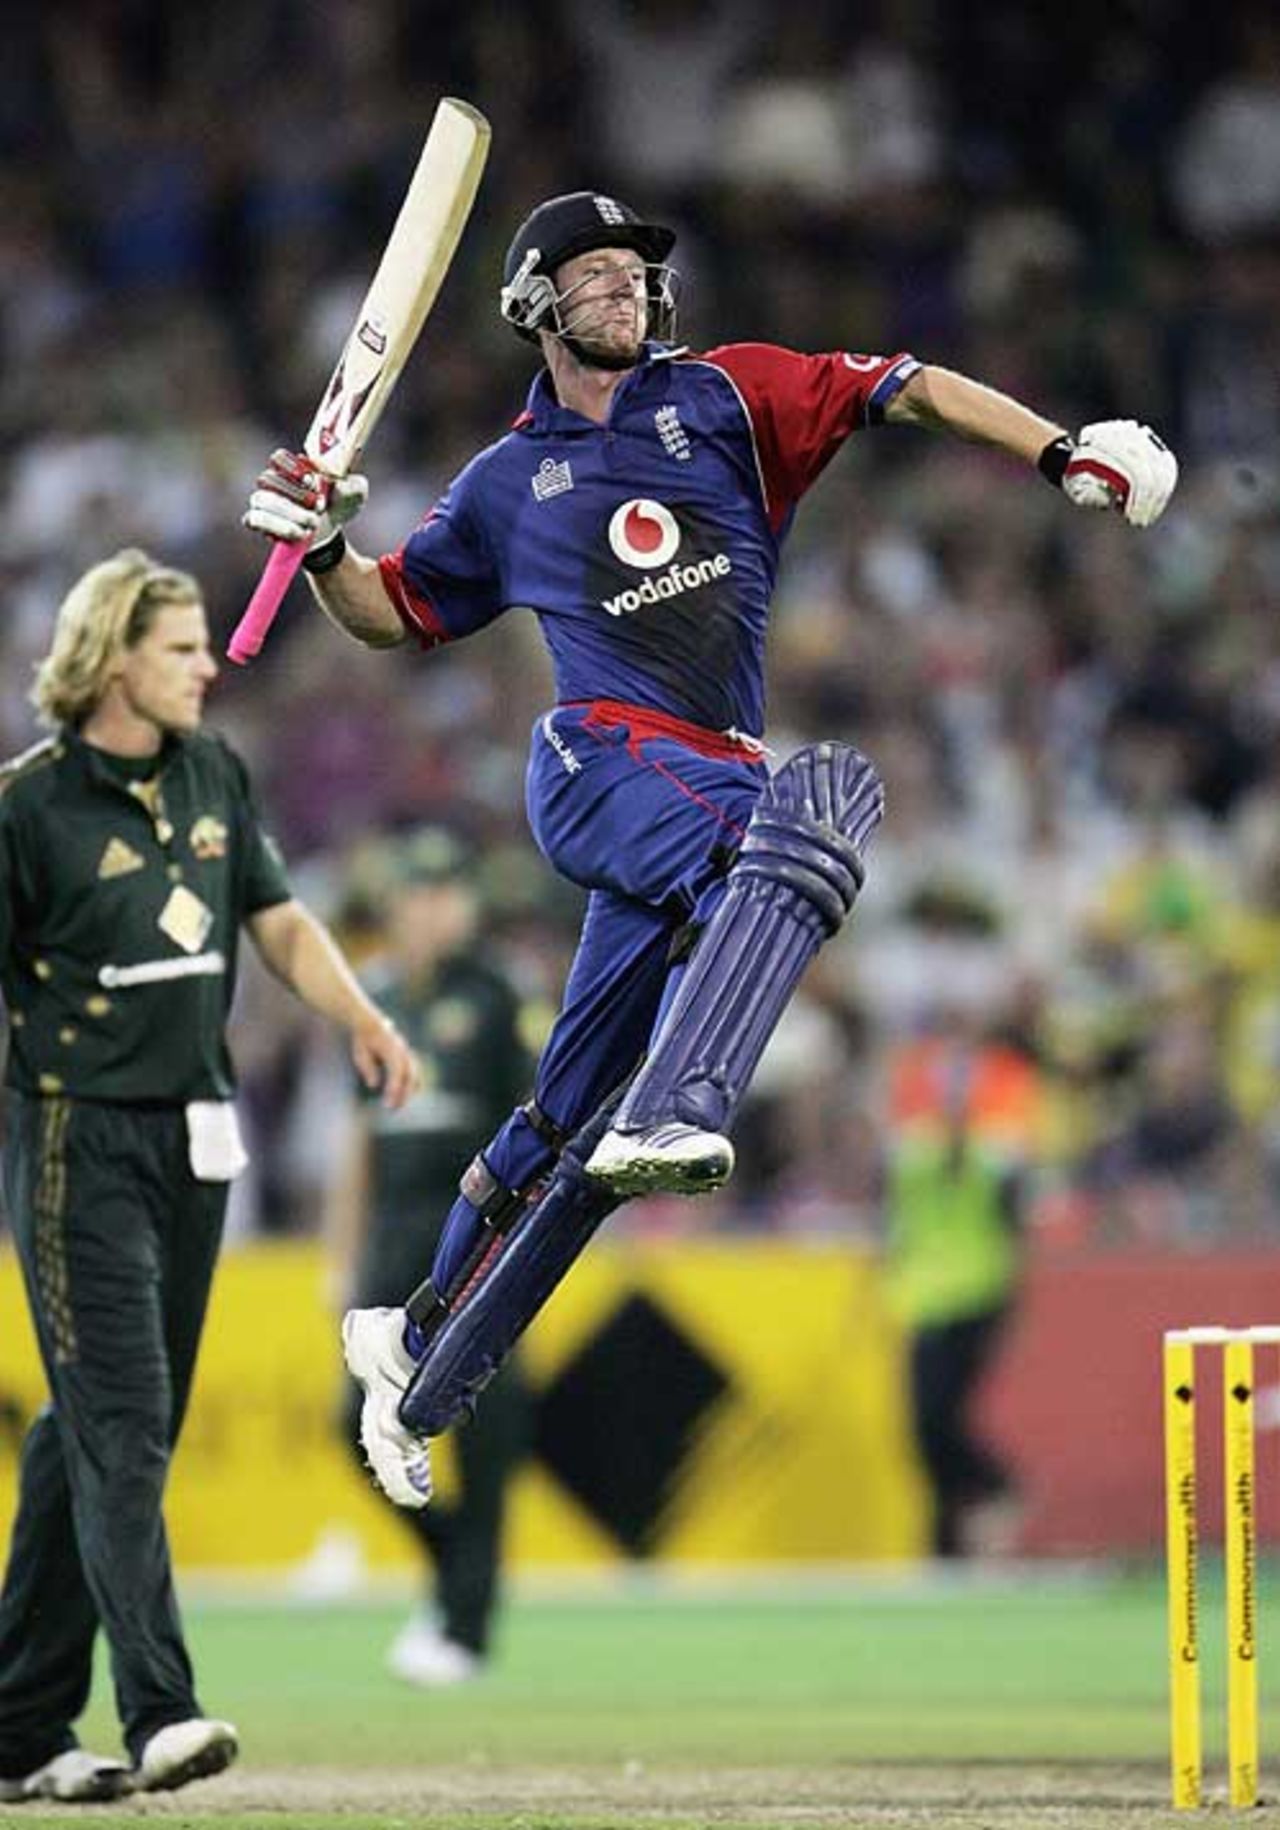 Paul Collingwood jumps for joy as England win the first final, Australia v England, first CB Series final, Melbourne, February 9, 2007